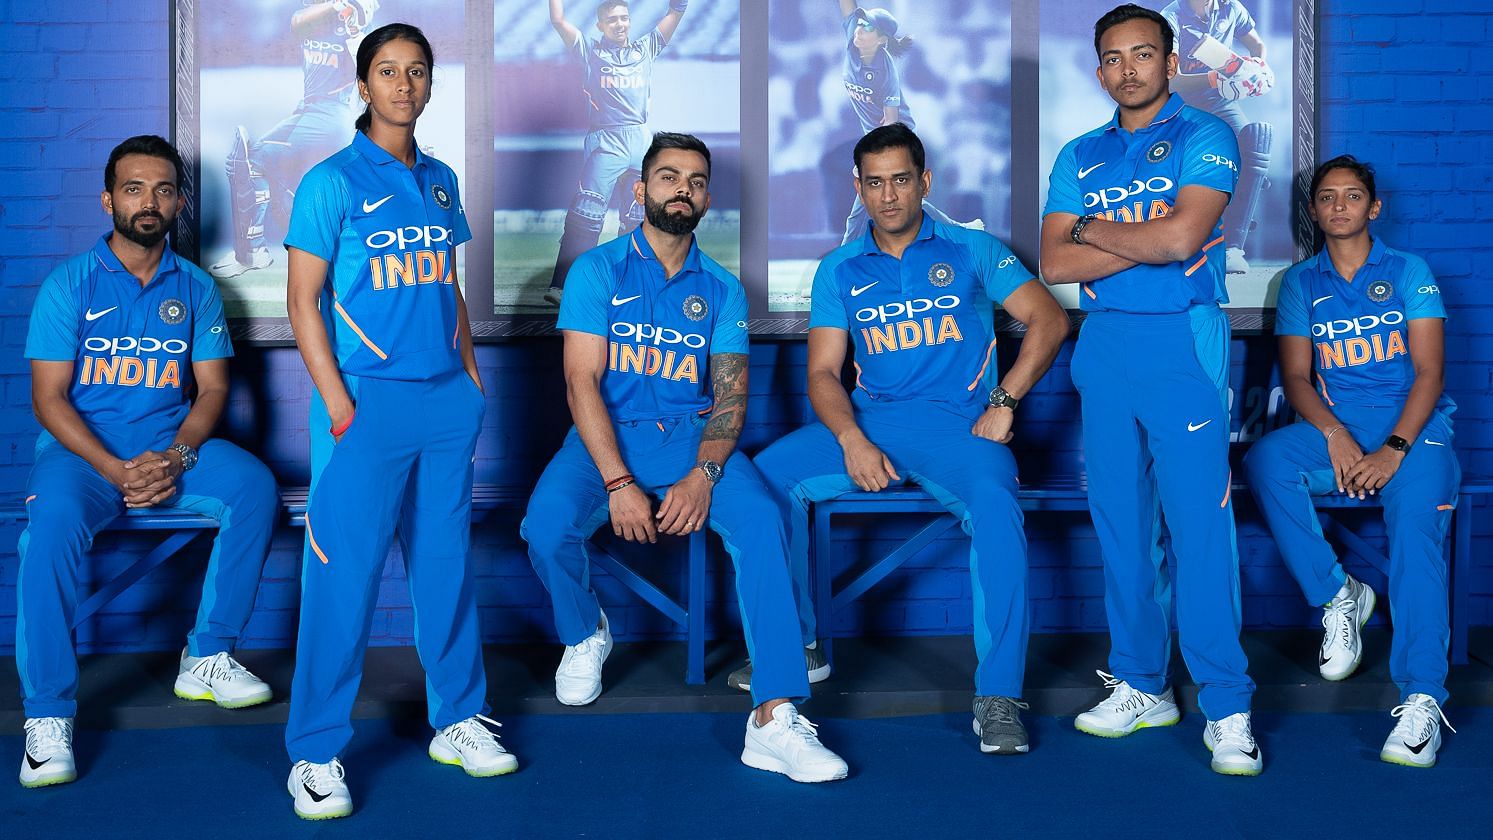 Team India Jersey at Cricket World Cup